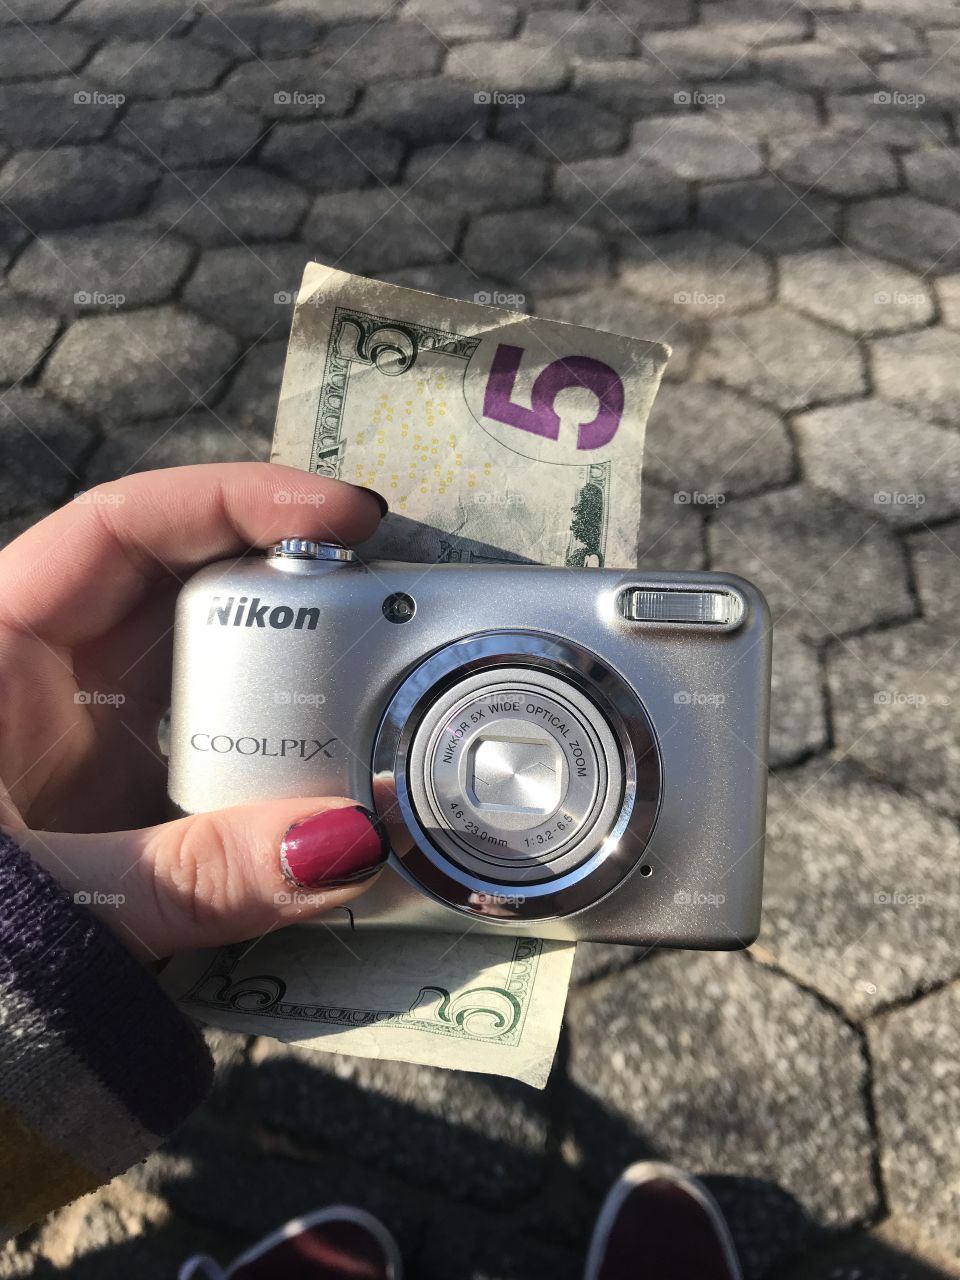 From snapshot to five dollar bill: an image of a Nikon point-and-shoot camera rested on a five dollar bill. 